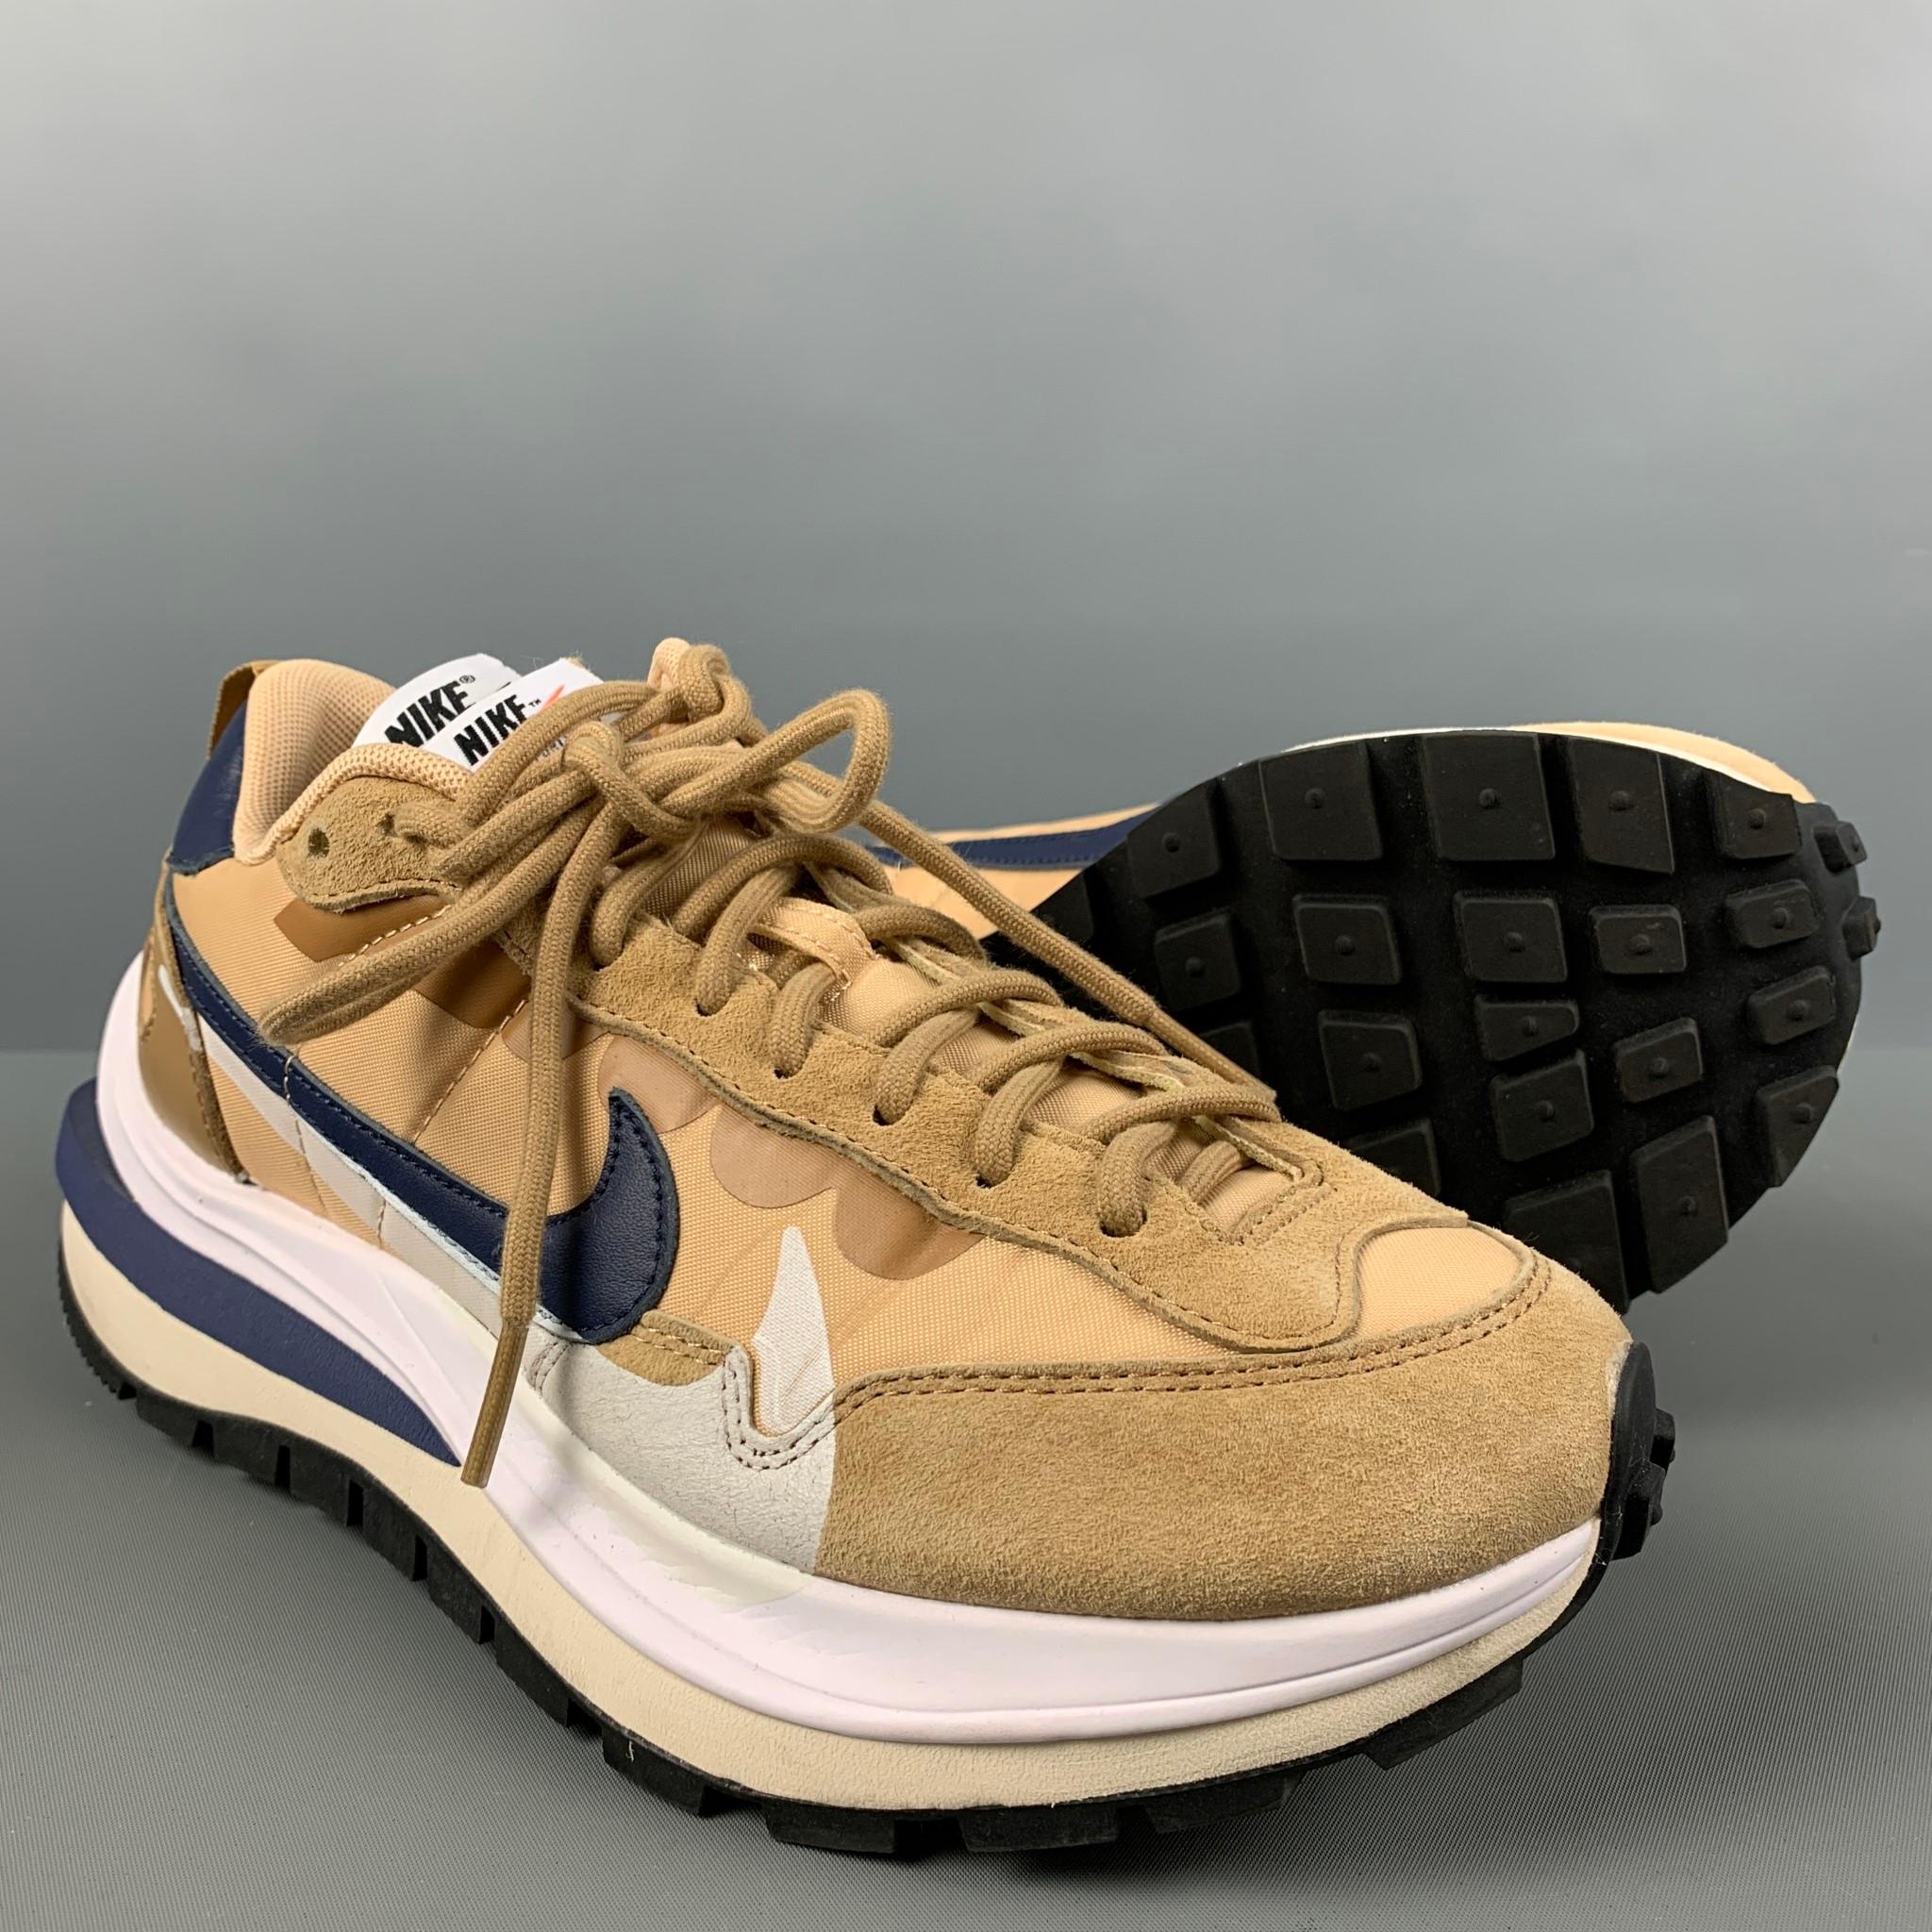 NIKE x SACAI Size 7.5 Tan Navy Mixed Materials Suede Runner Sneakers 3